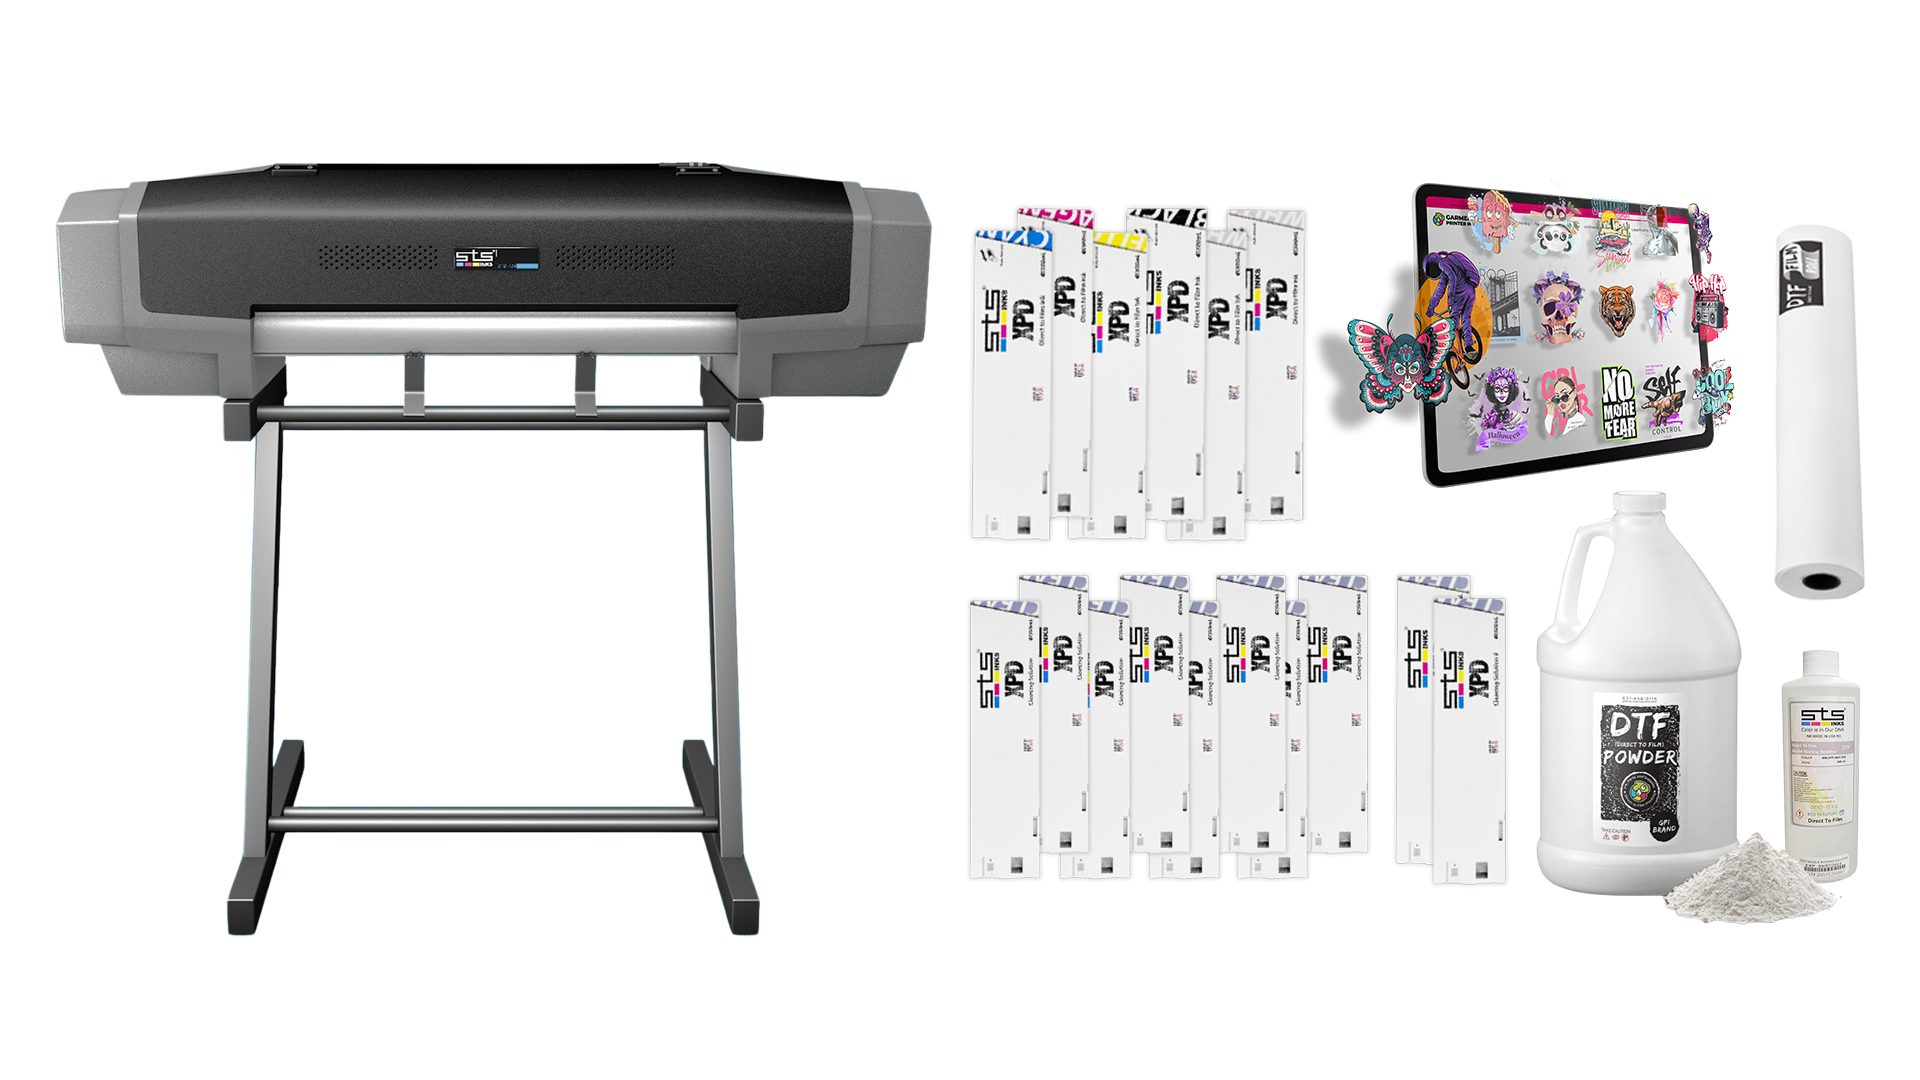 STS XPD-724 DTF Printer Cartridge Package